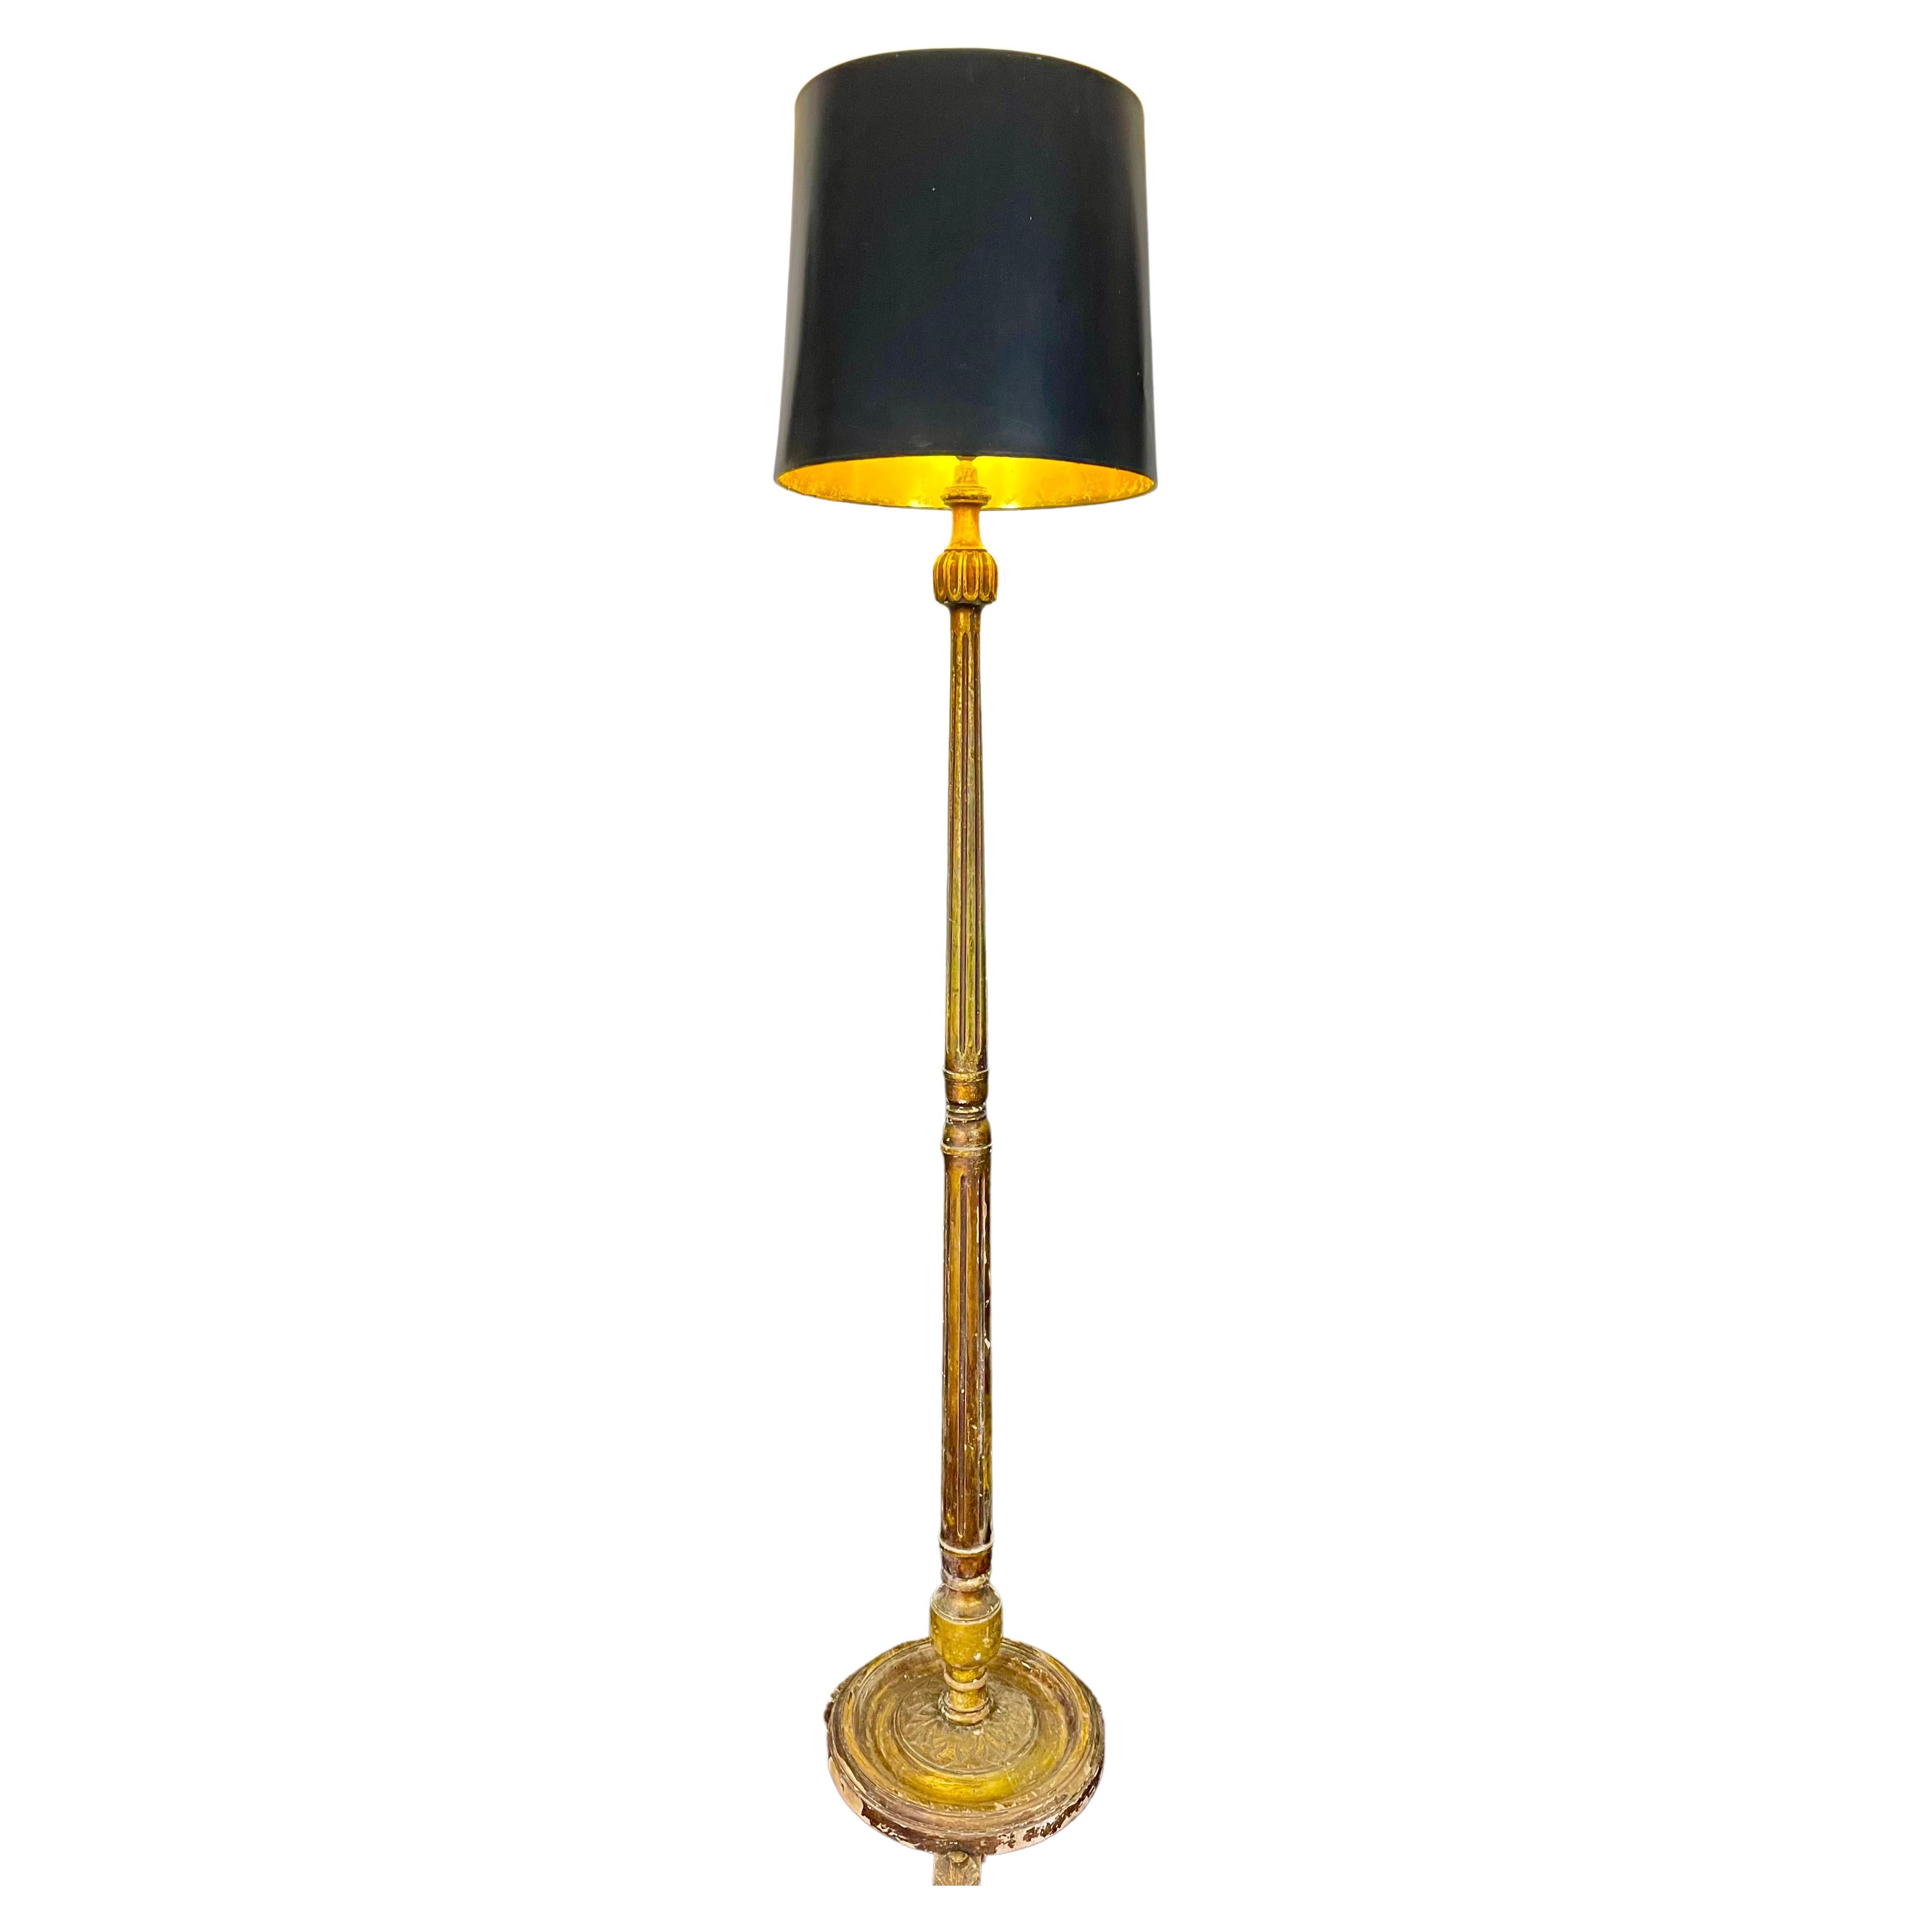 French Floor Lamp in Fluted and Gilded Wood, Louis XVI Style, 20t Century For Sale